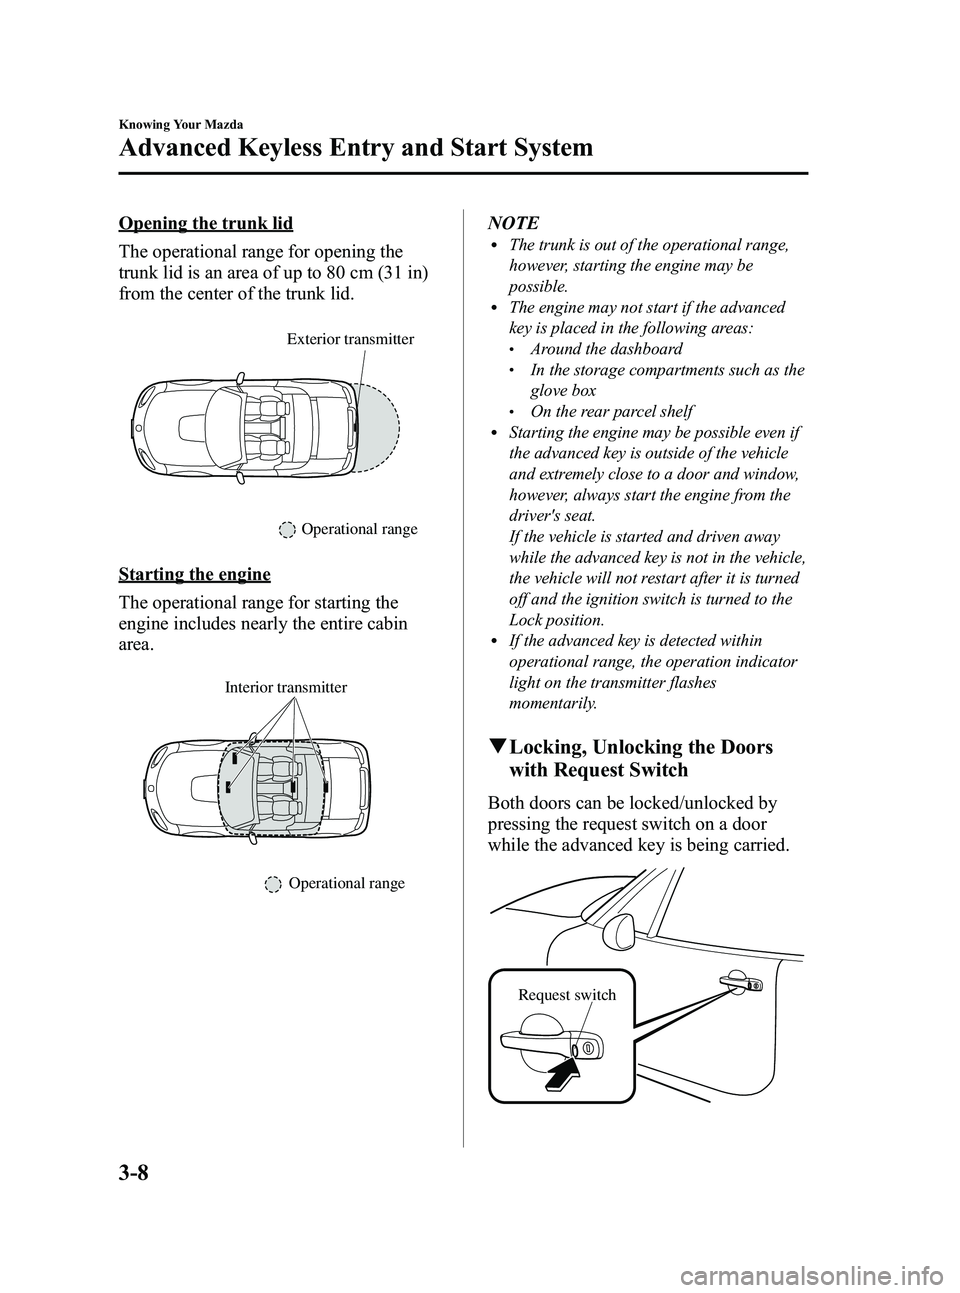 MAZDA MODEL MX-5 MIATA 2010  Owners Manual Black plate (70,1)
Opening the trunk lid
The operational range for opening the
trunk lid is an area of up to 80 cm (31 in)
from the center of the trunk lid.
Exterior transmitter
Operational range
Star